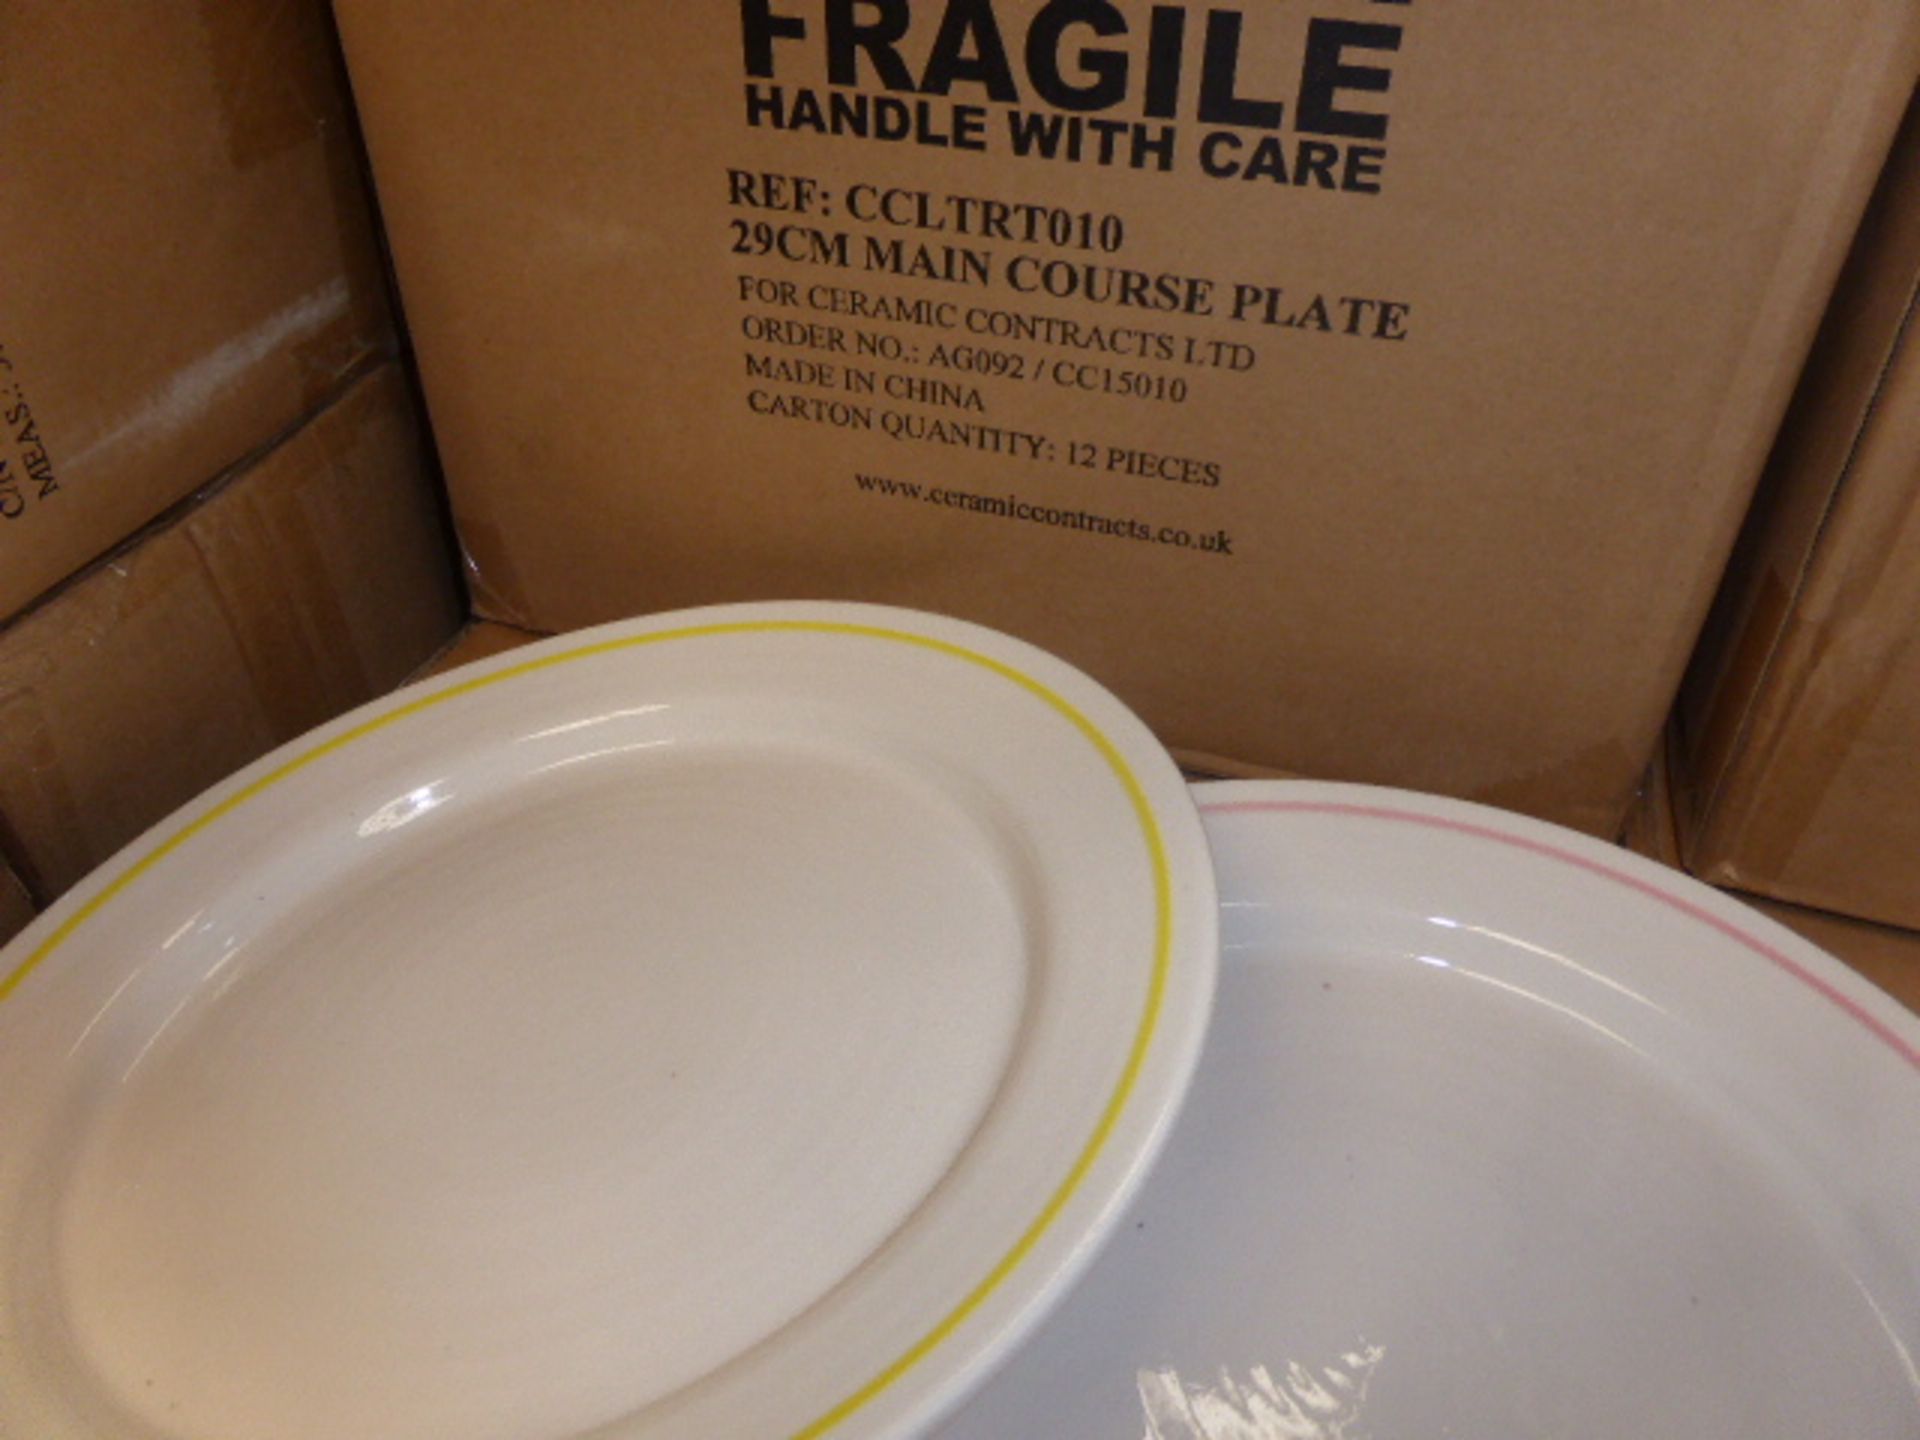 12 29cm main course dinner plates in white finish with multi colour banding